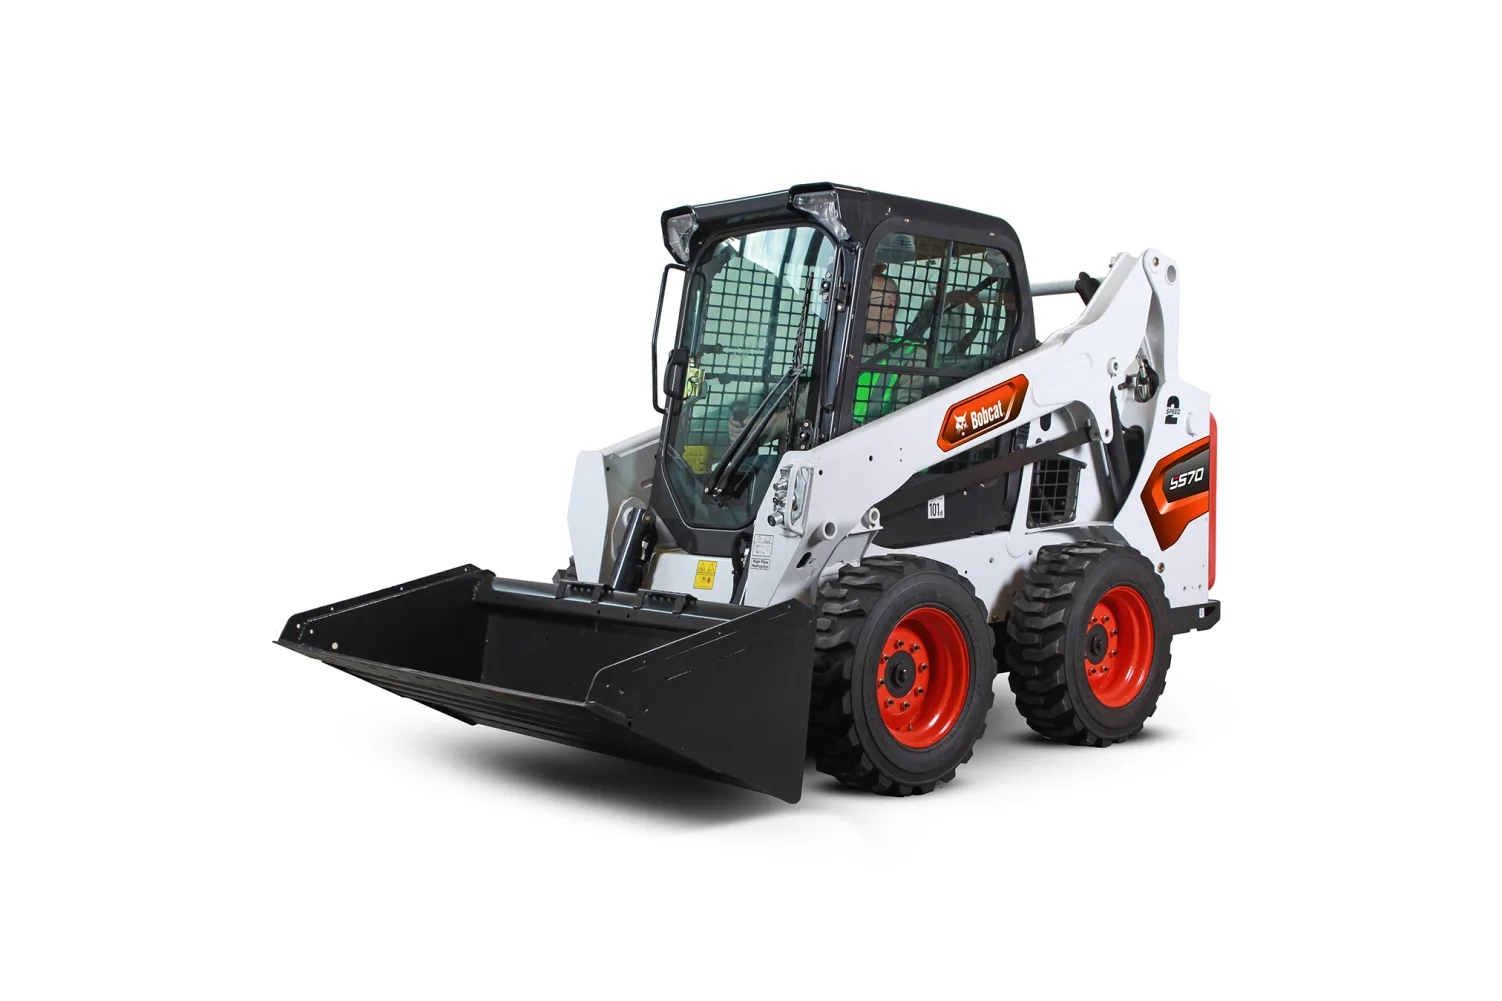 Browse Specs and more for the S570 Skid-Steer Loader - White Star Machinery